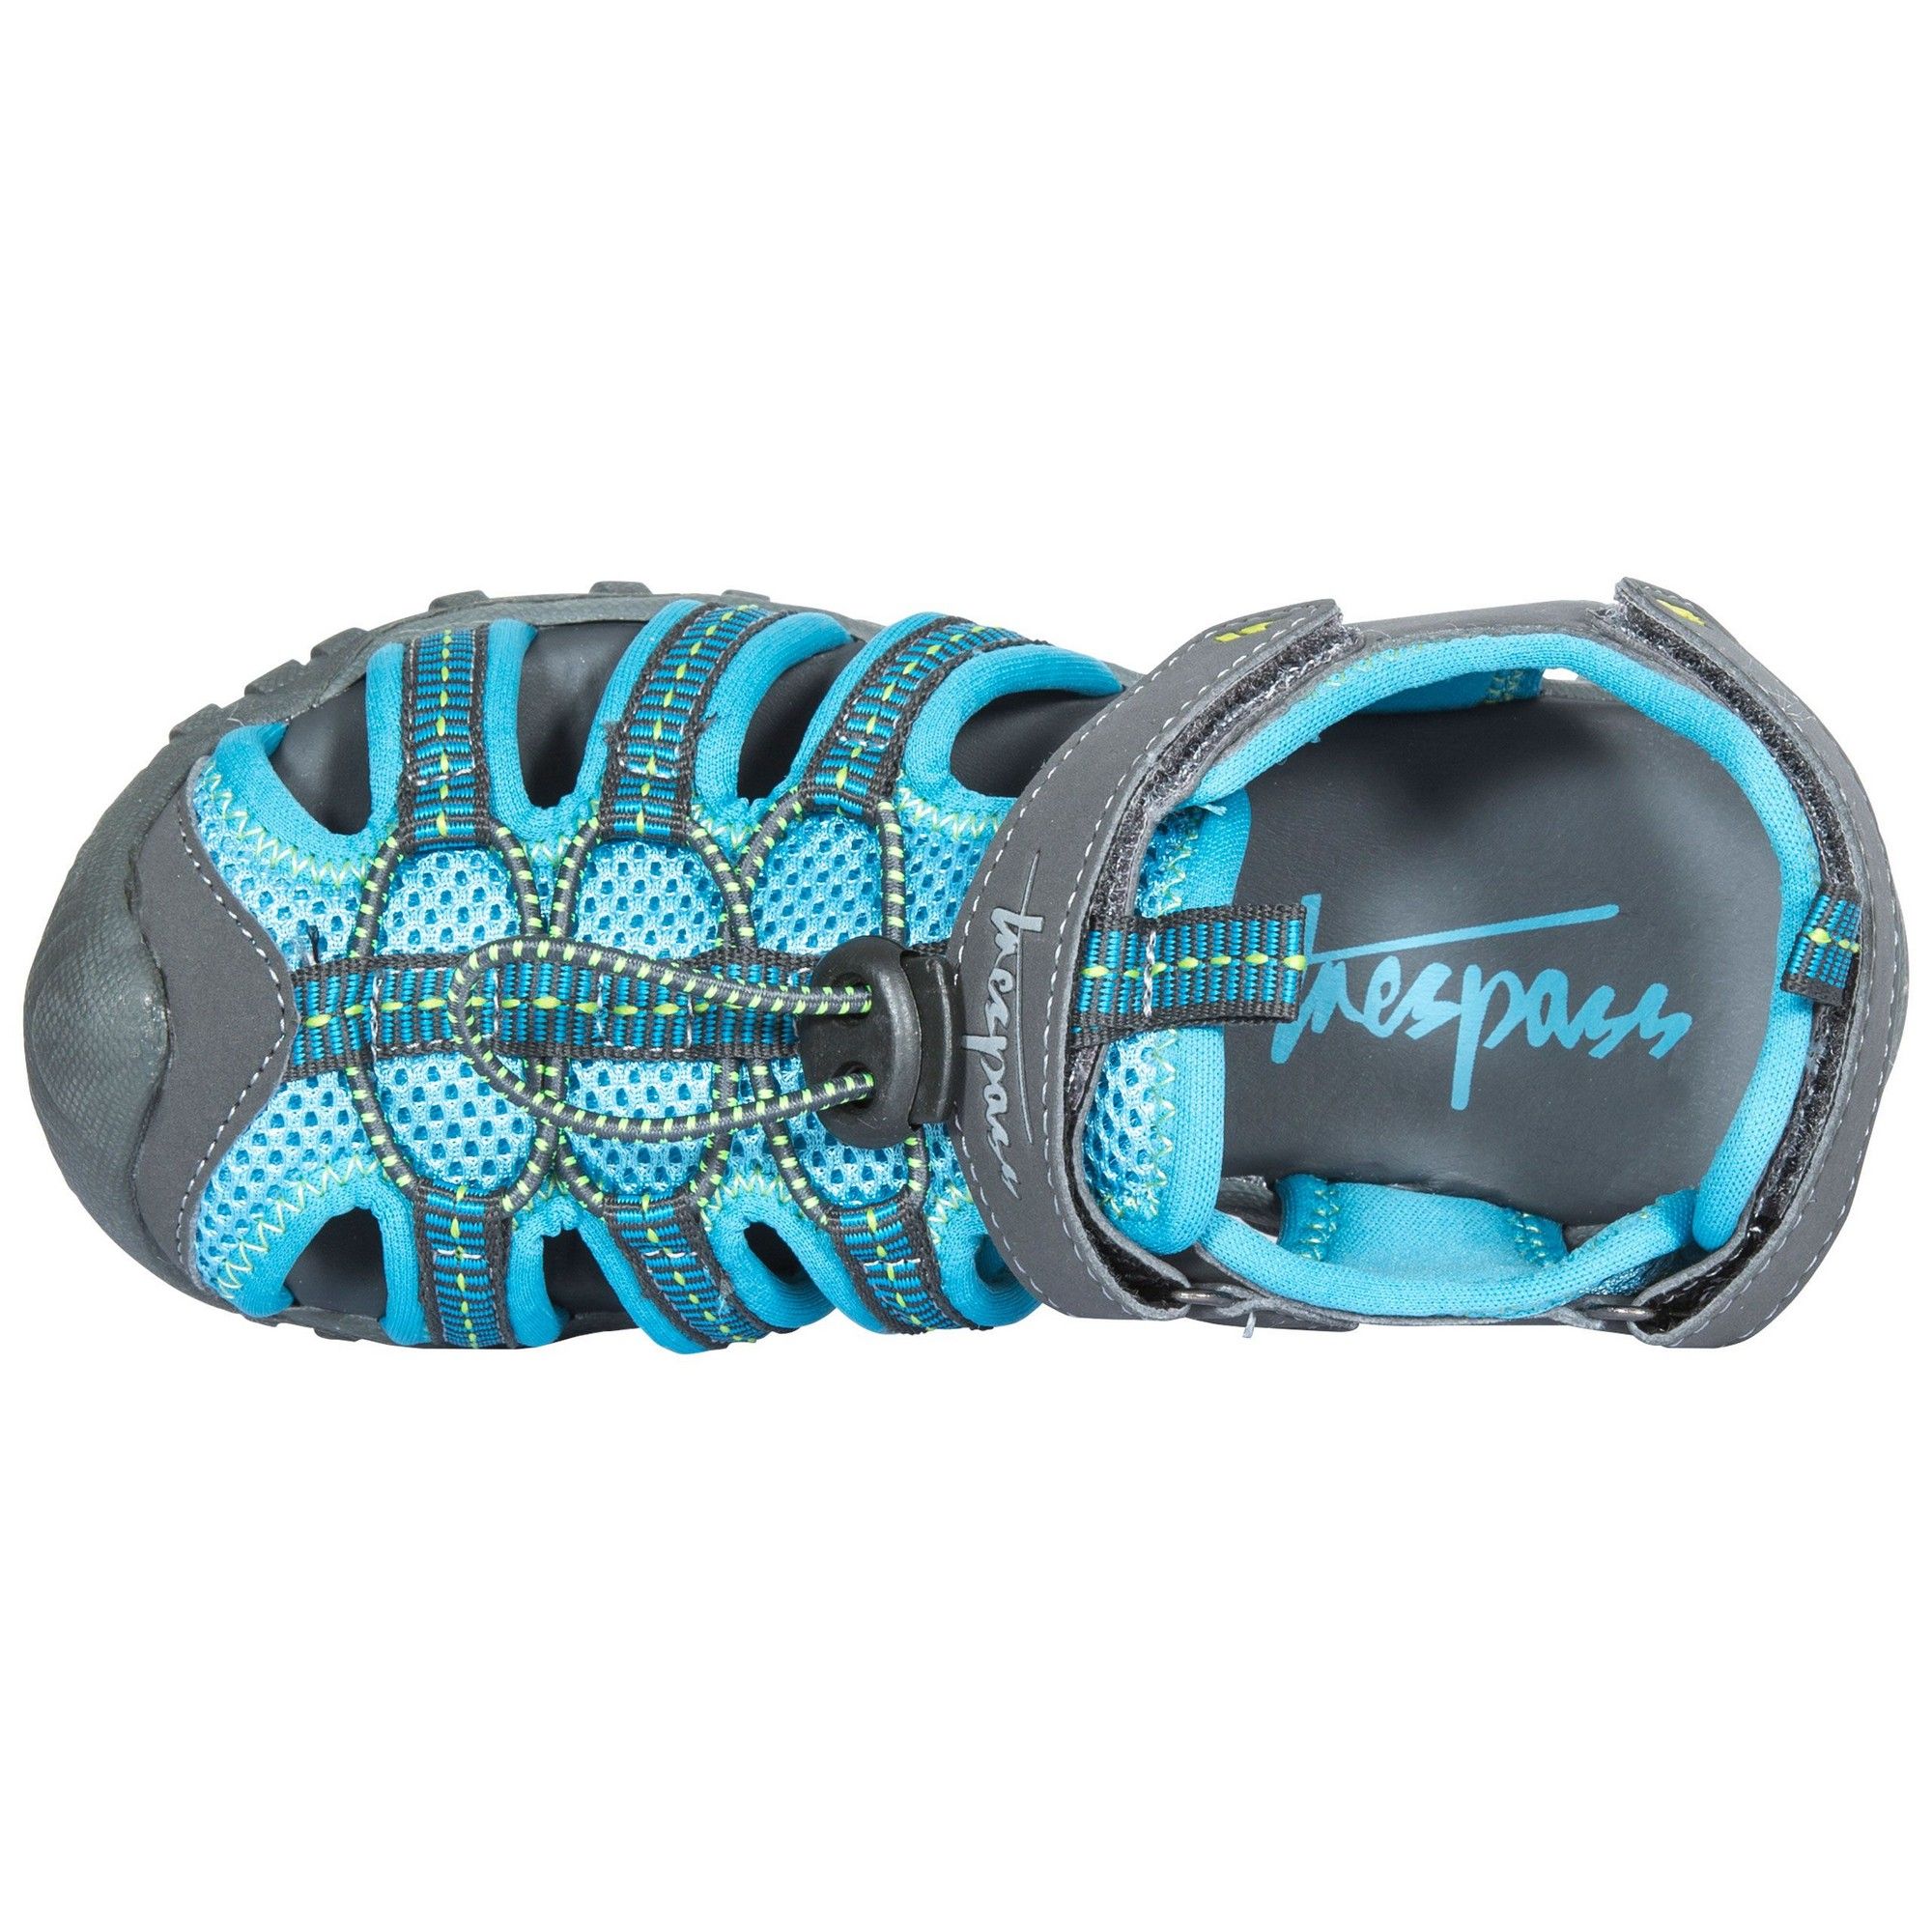 Kids protective active sandal. Closed toe. Adjustable ankle and instep straps. Adjustable pull cord. Cushioned and moulded footbed. Durable multi-purpose outsole. Upper: PU/Mesh/Textile webbing, Lining: Spandex, Outsole: TPR.